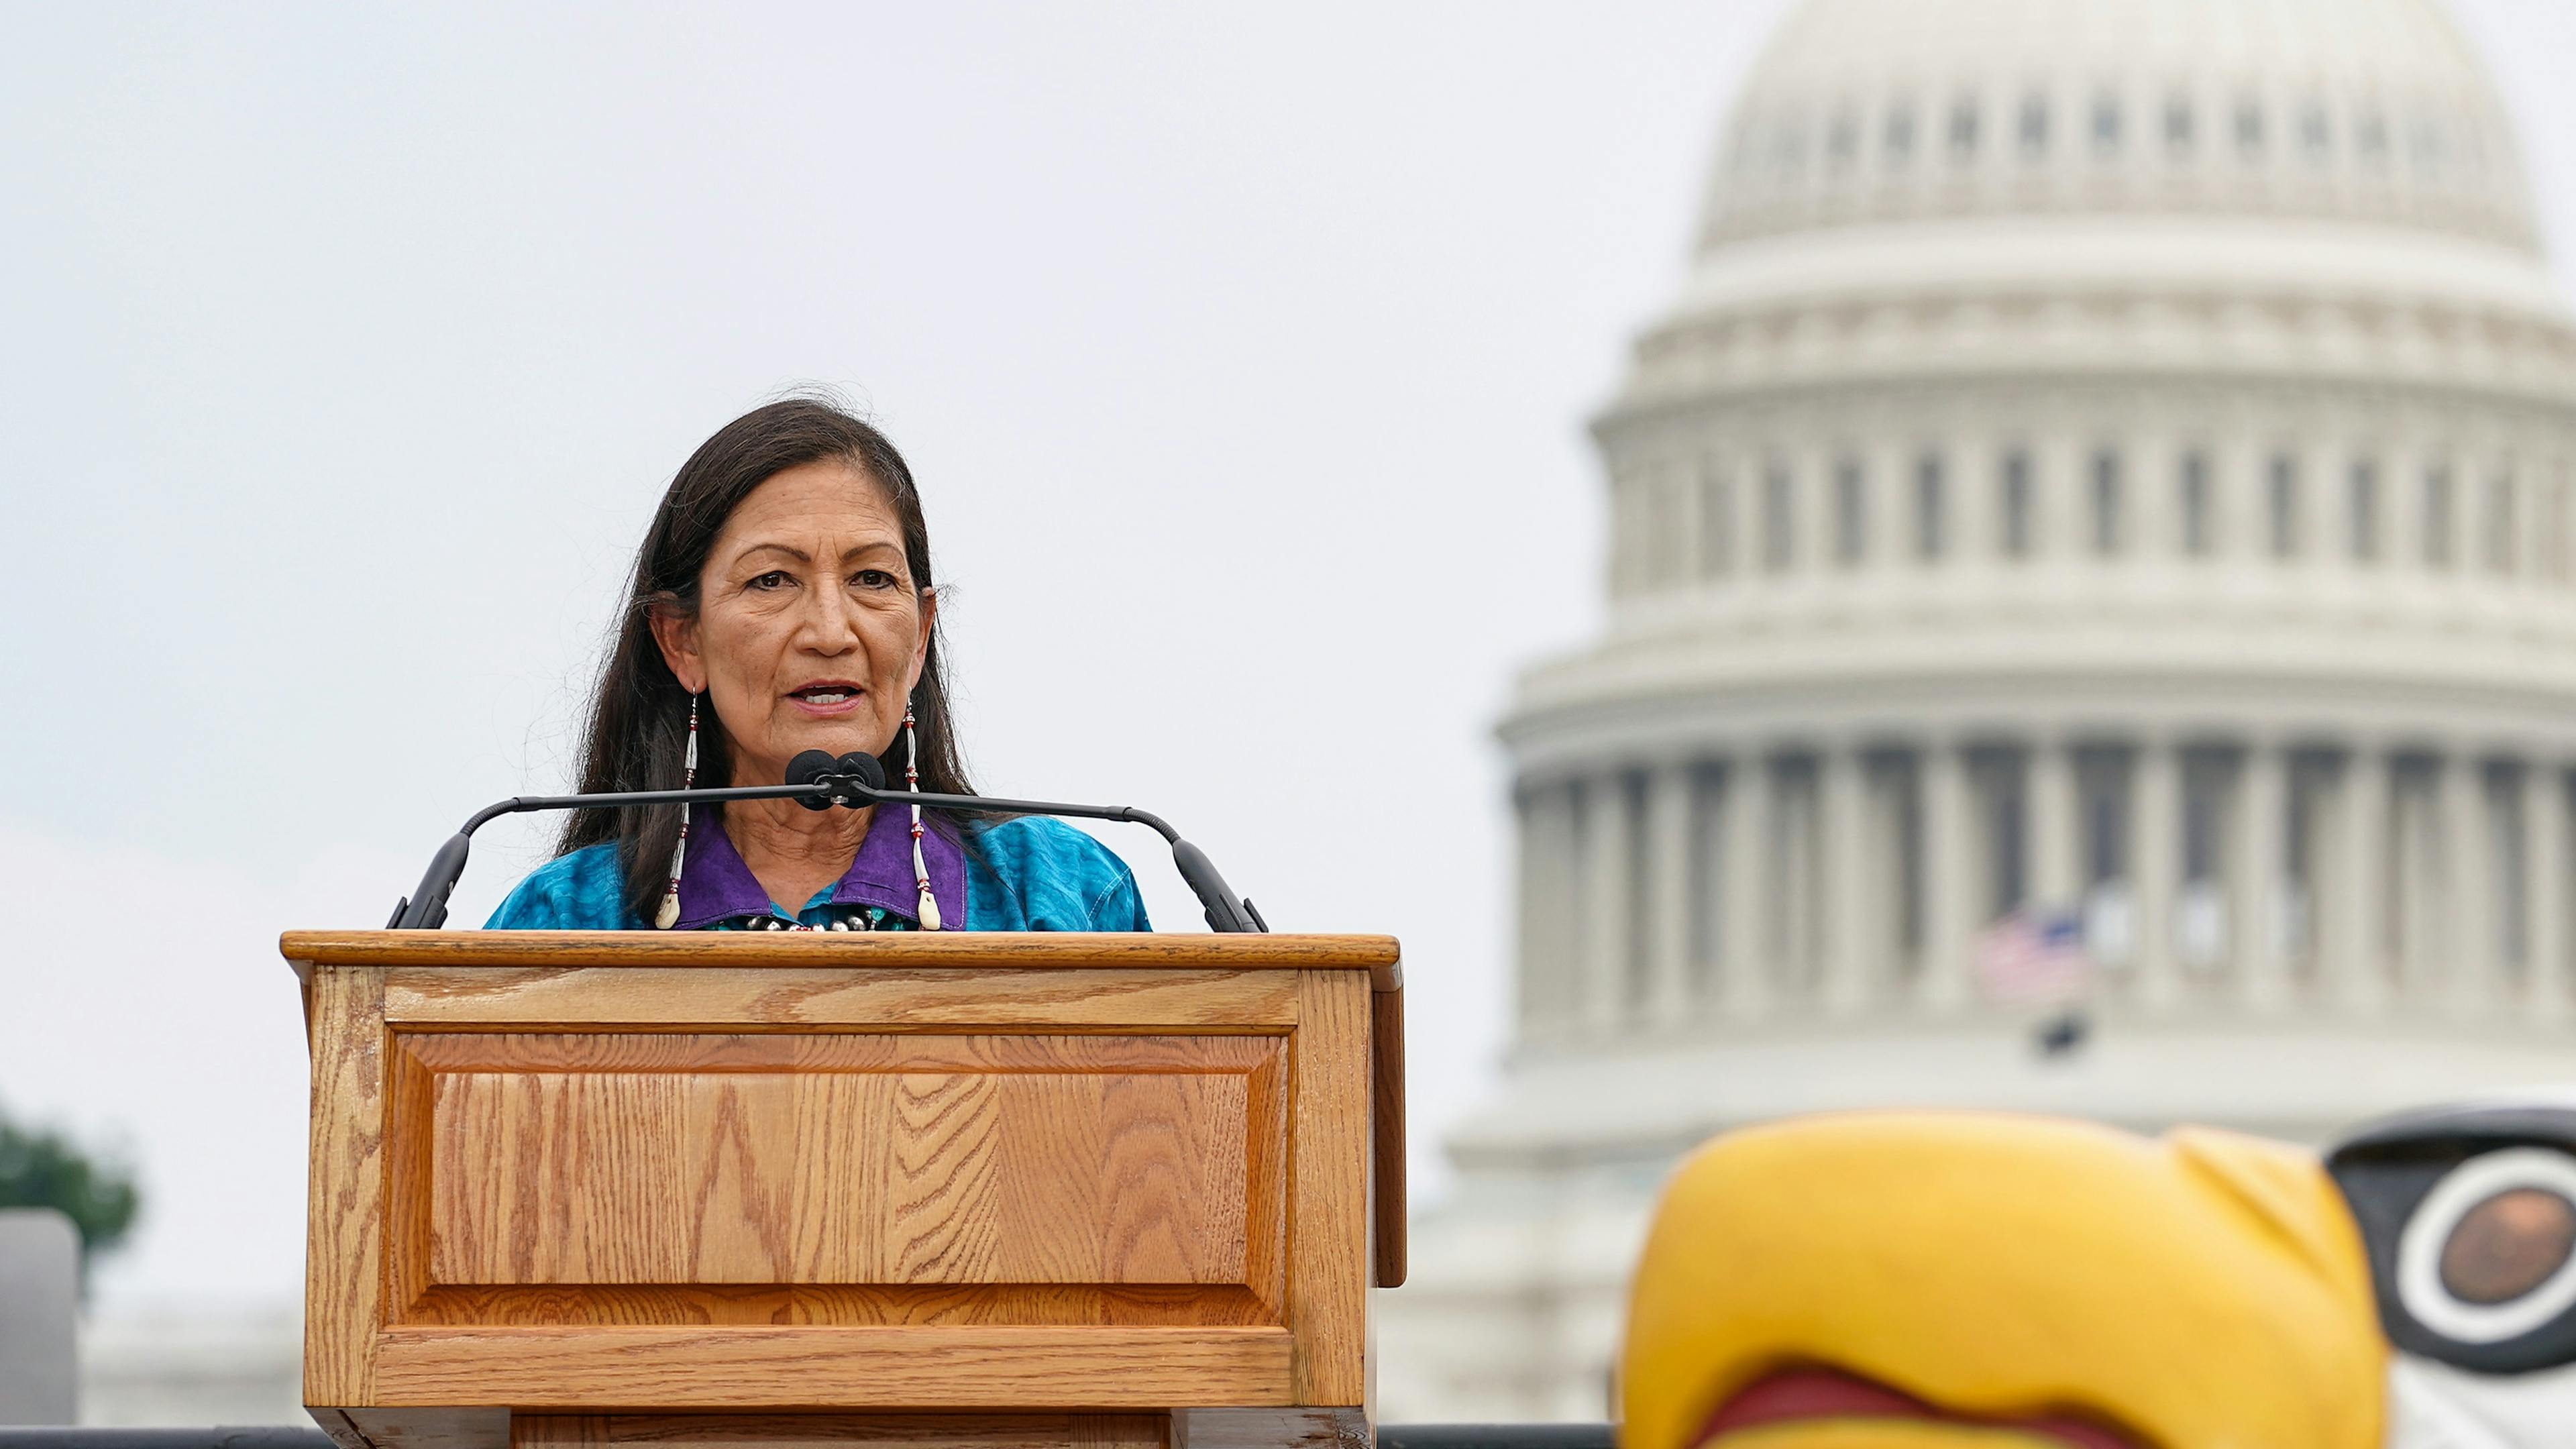 Secretary of the Interior Deb Haaland delivers remarks at an event in Washington, DC. 